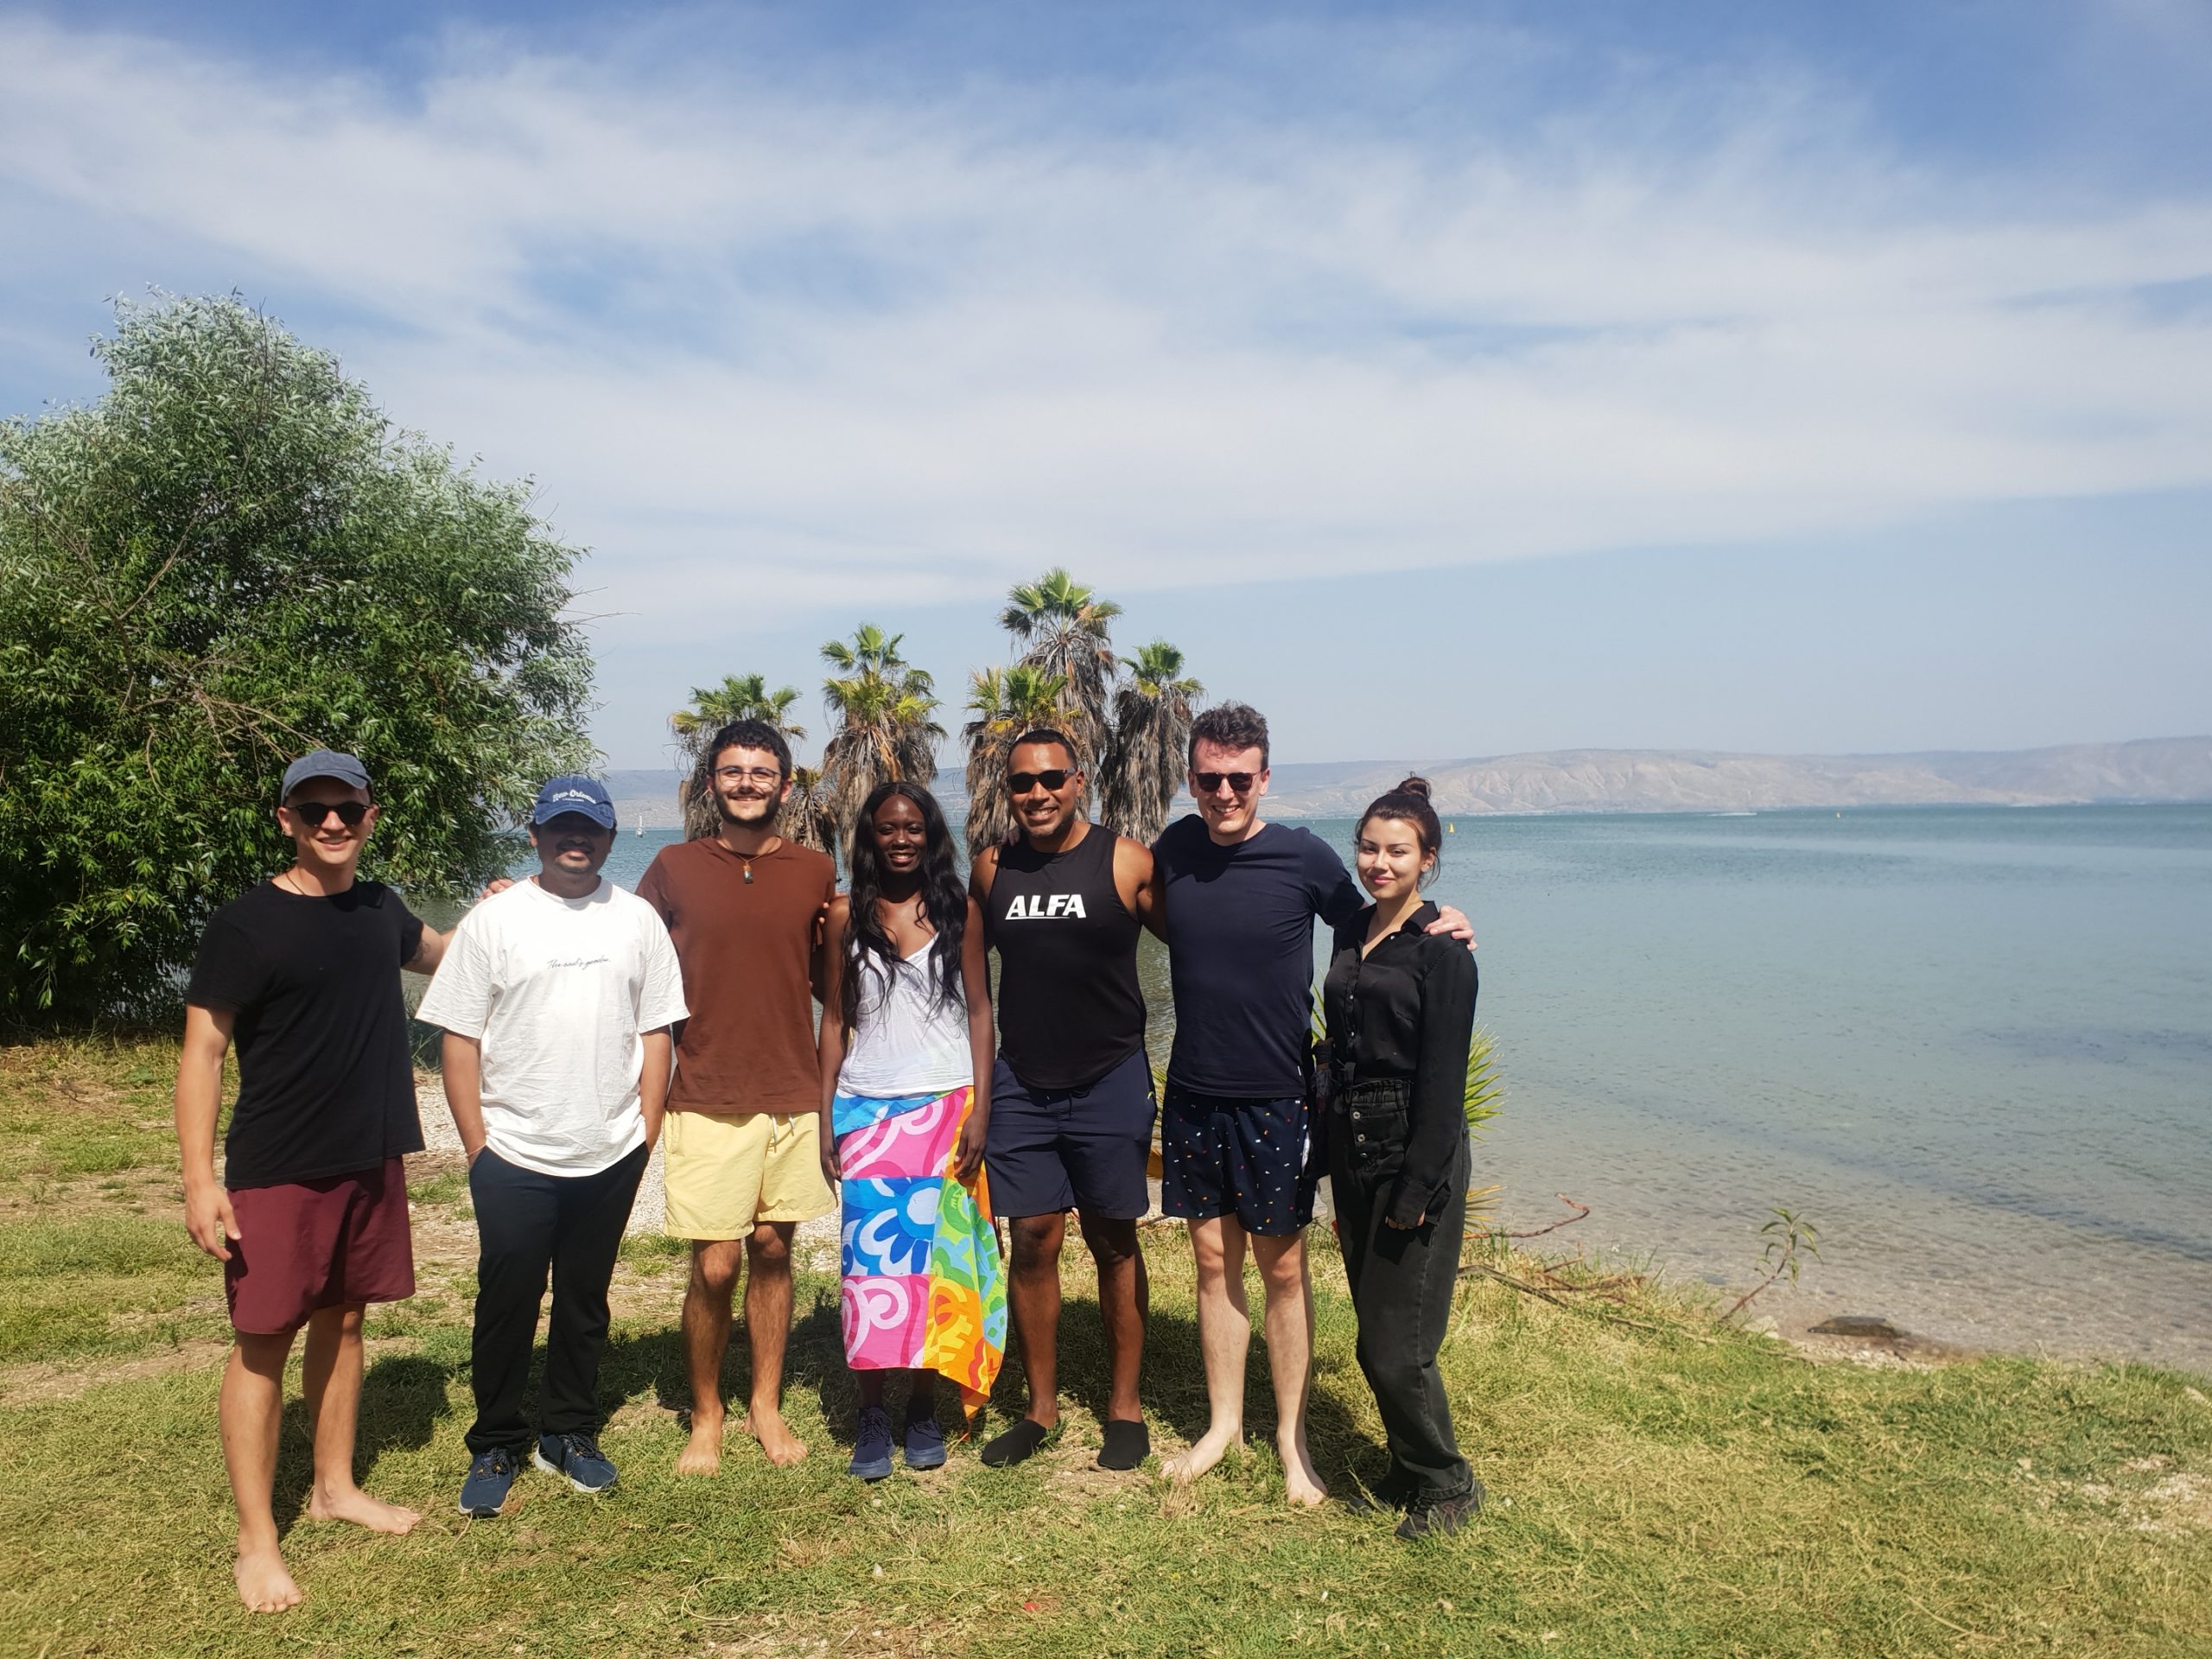 IThe Kinneret and Christian-Jewish Relations